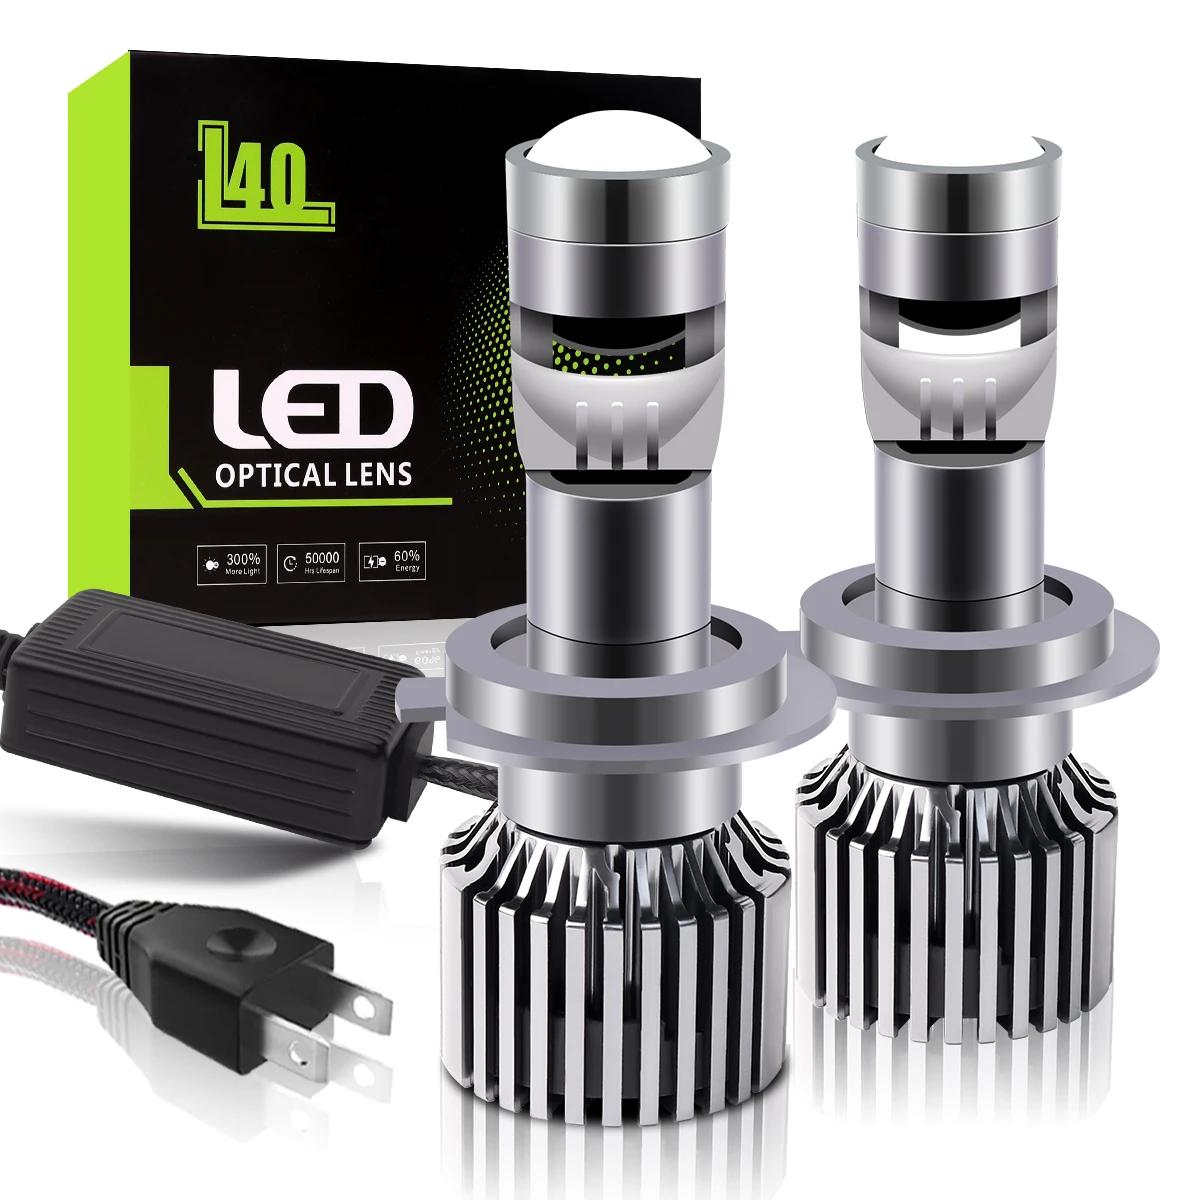 ڵ Ϳ LED Ʈ ̴   9005/9006, ڵ ο  STG ĵ , 2x H7, H11, LHD, RHD, 12V, 120W, 50000LM